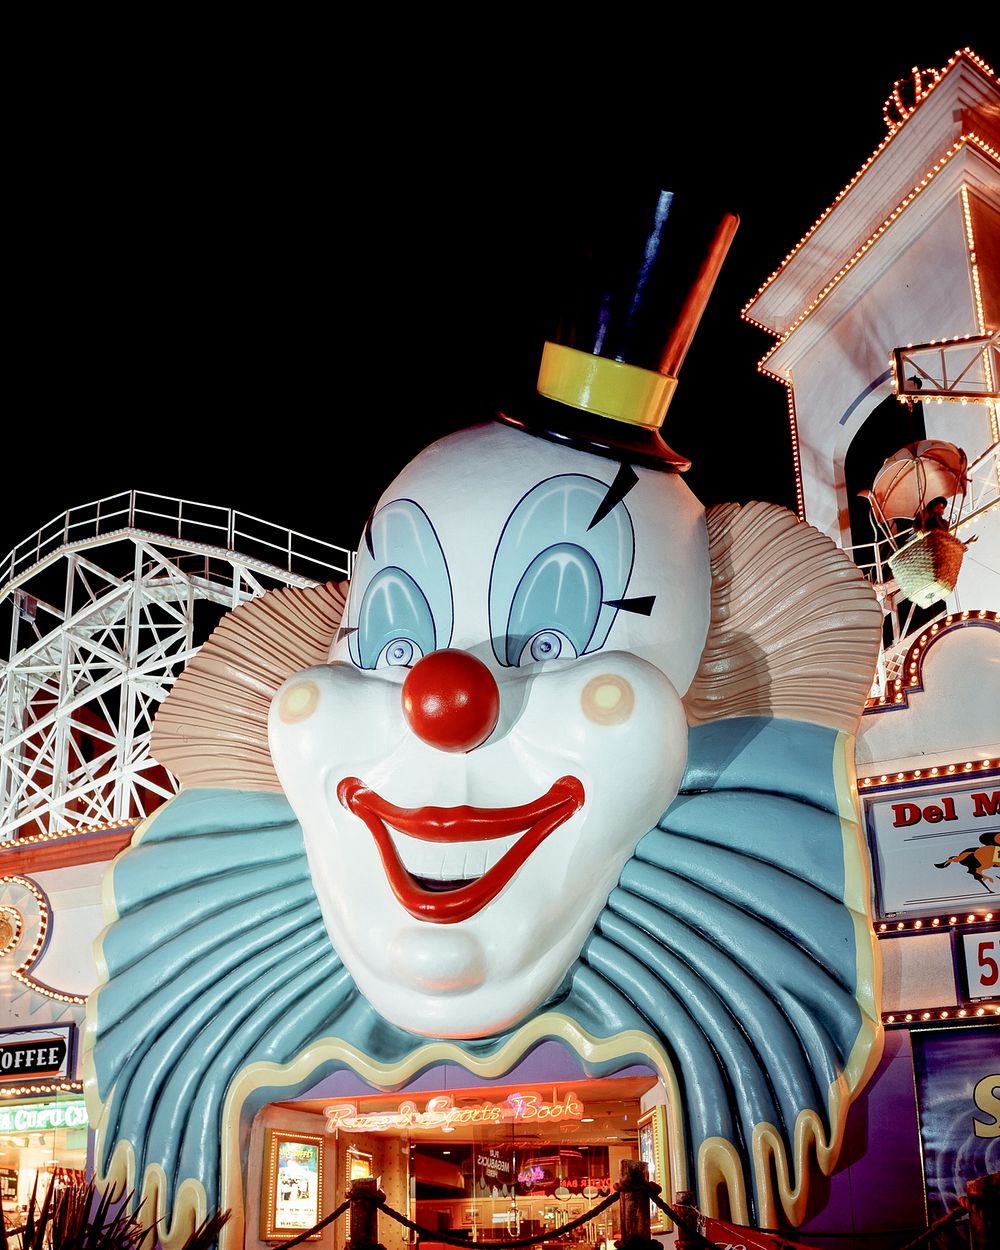 Las Vegas Clown Casino photograph taken in the 1980s. Original image from Carol M. Highsmith&rsquo;s America, Library of…